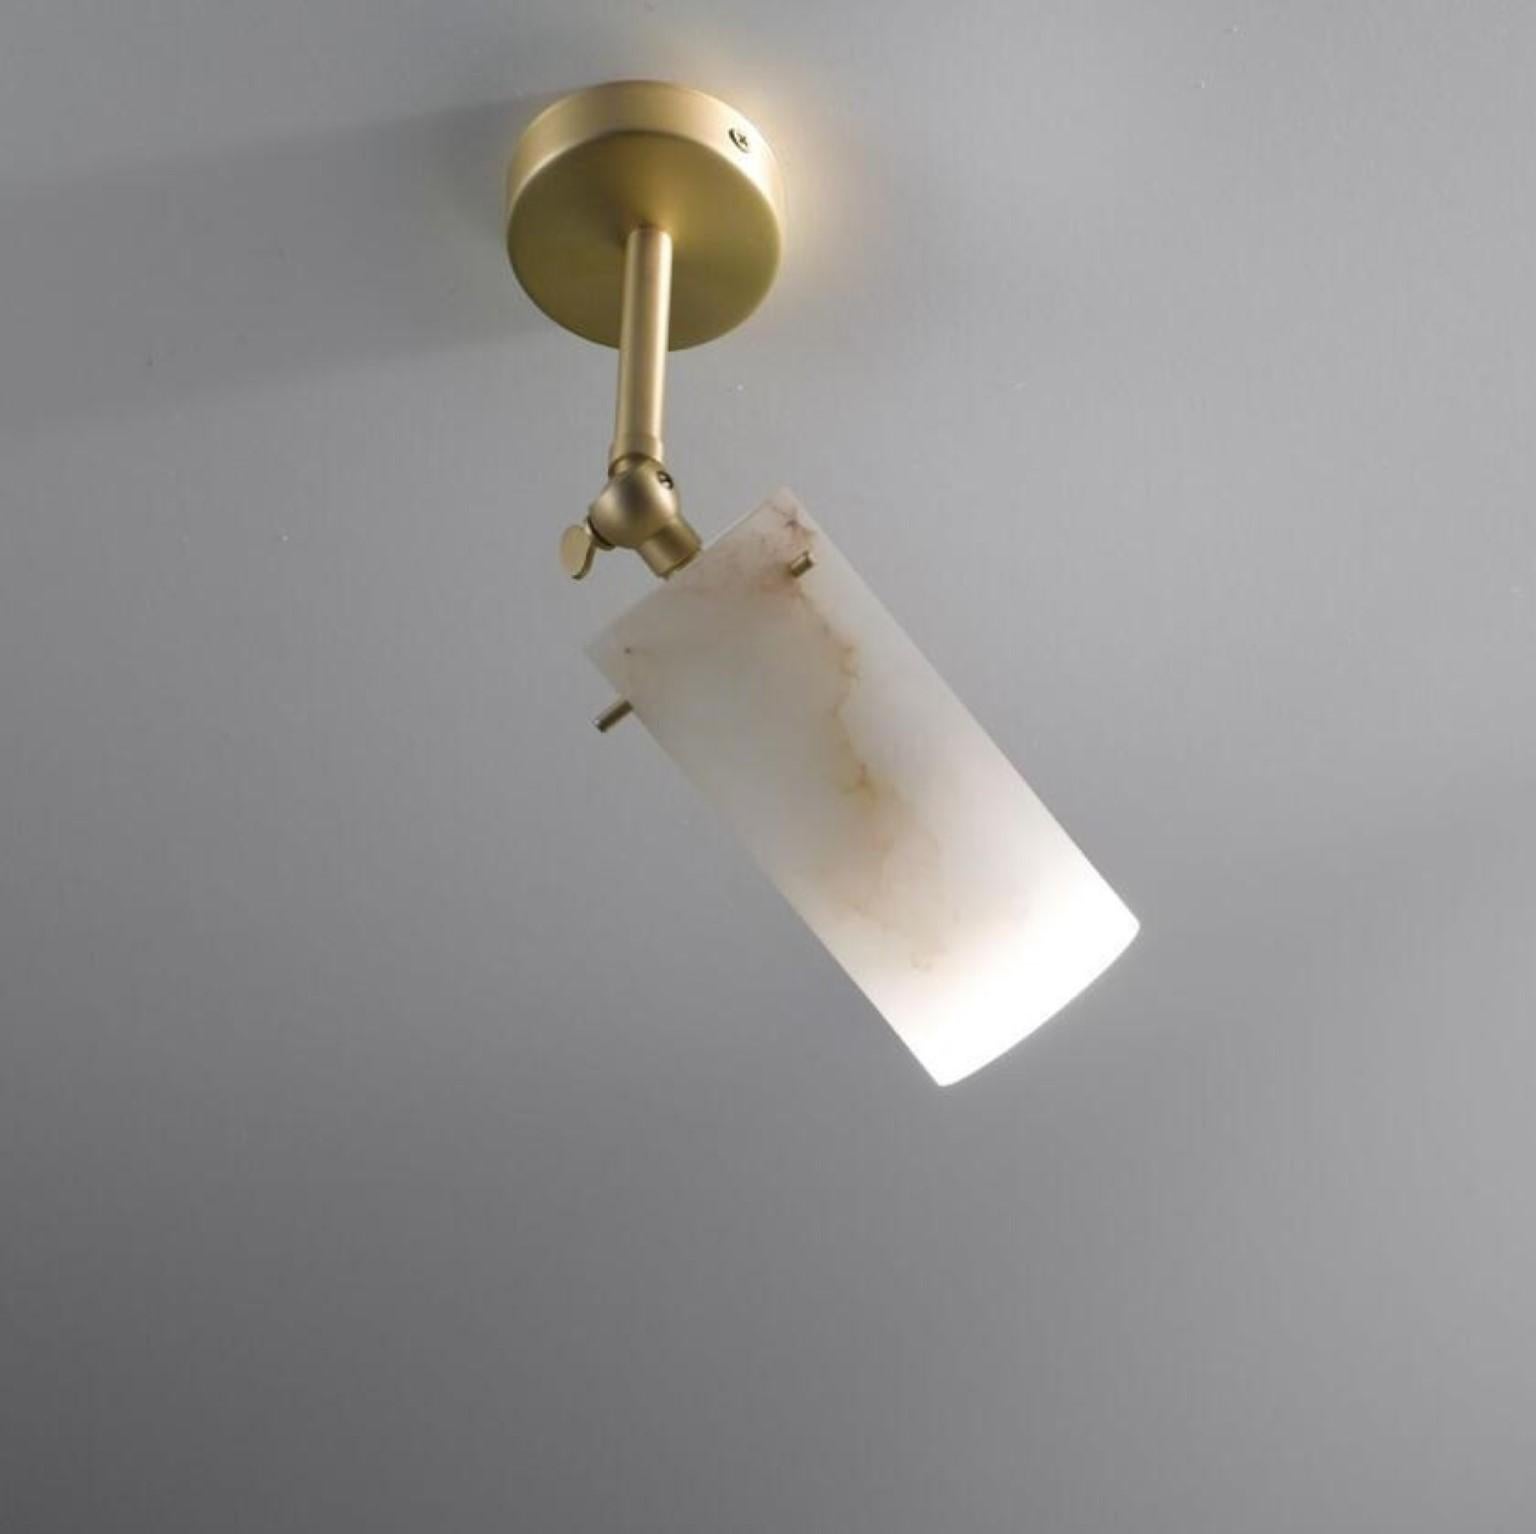 Spotlight Poseidone by Alabastro Italiano
Dimensions: W 8 x D 11 x H 15 cm
Materials: Italian white Alabaster, Brushed Brass
Other finishes available.
Light Source 1 x GU10 LED 6 Watt, Tot. 519 Lumen, 3000 k, 220 V

All our lamps can be wired